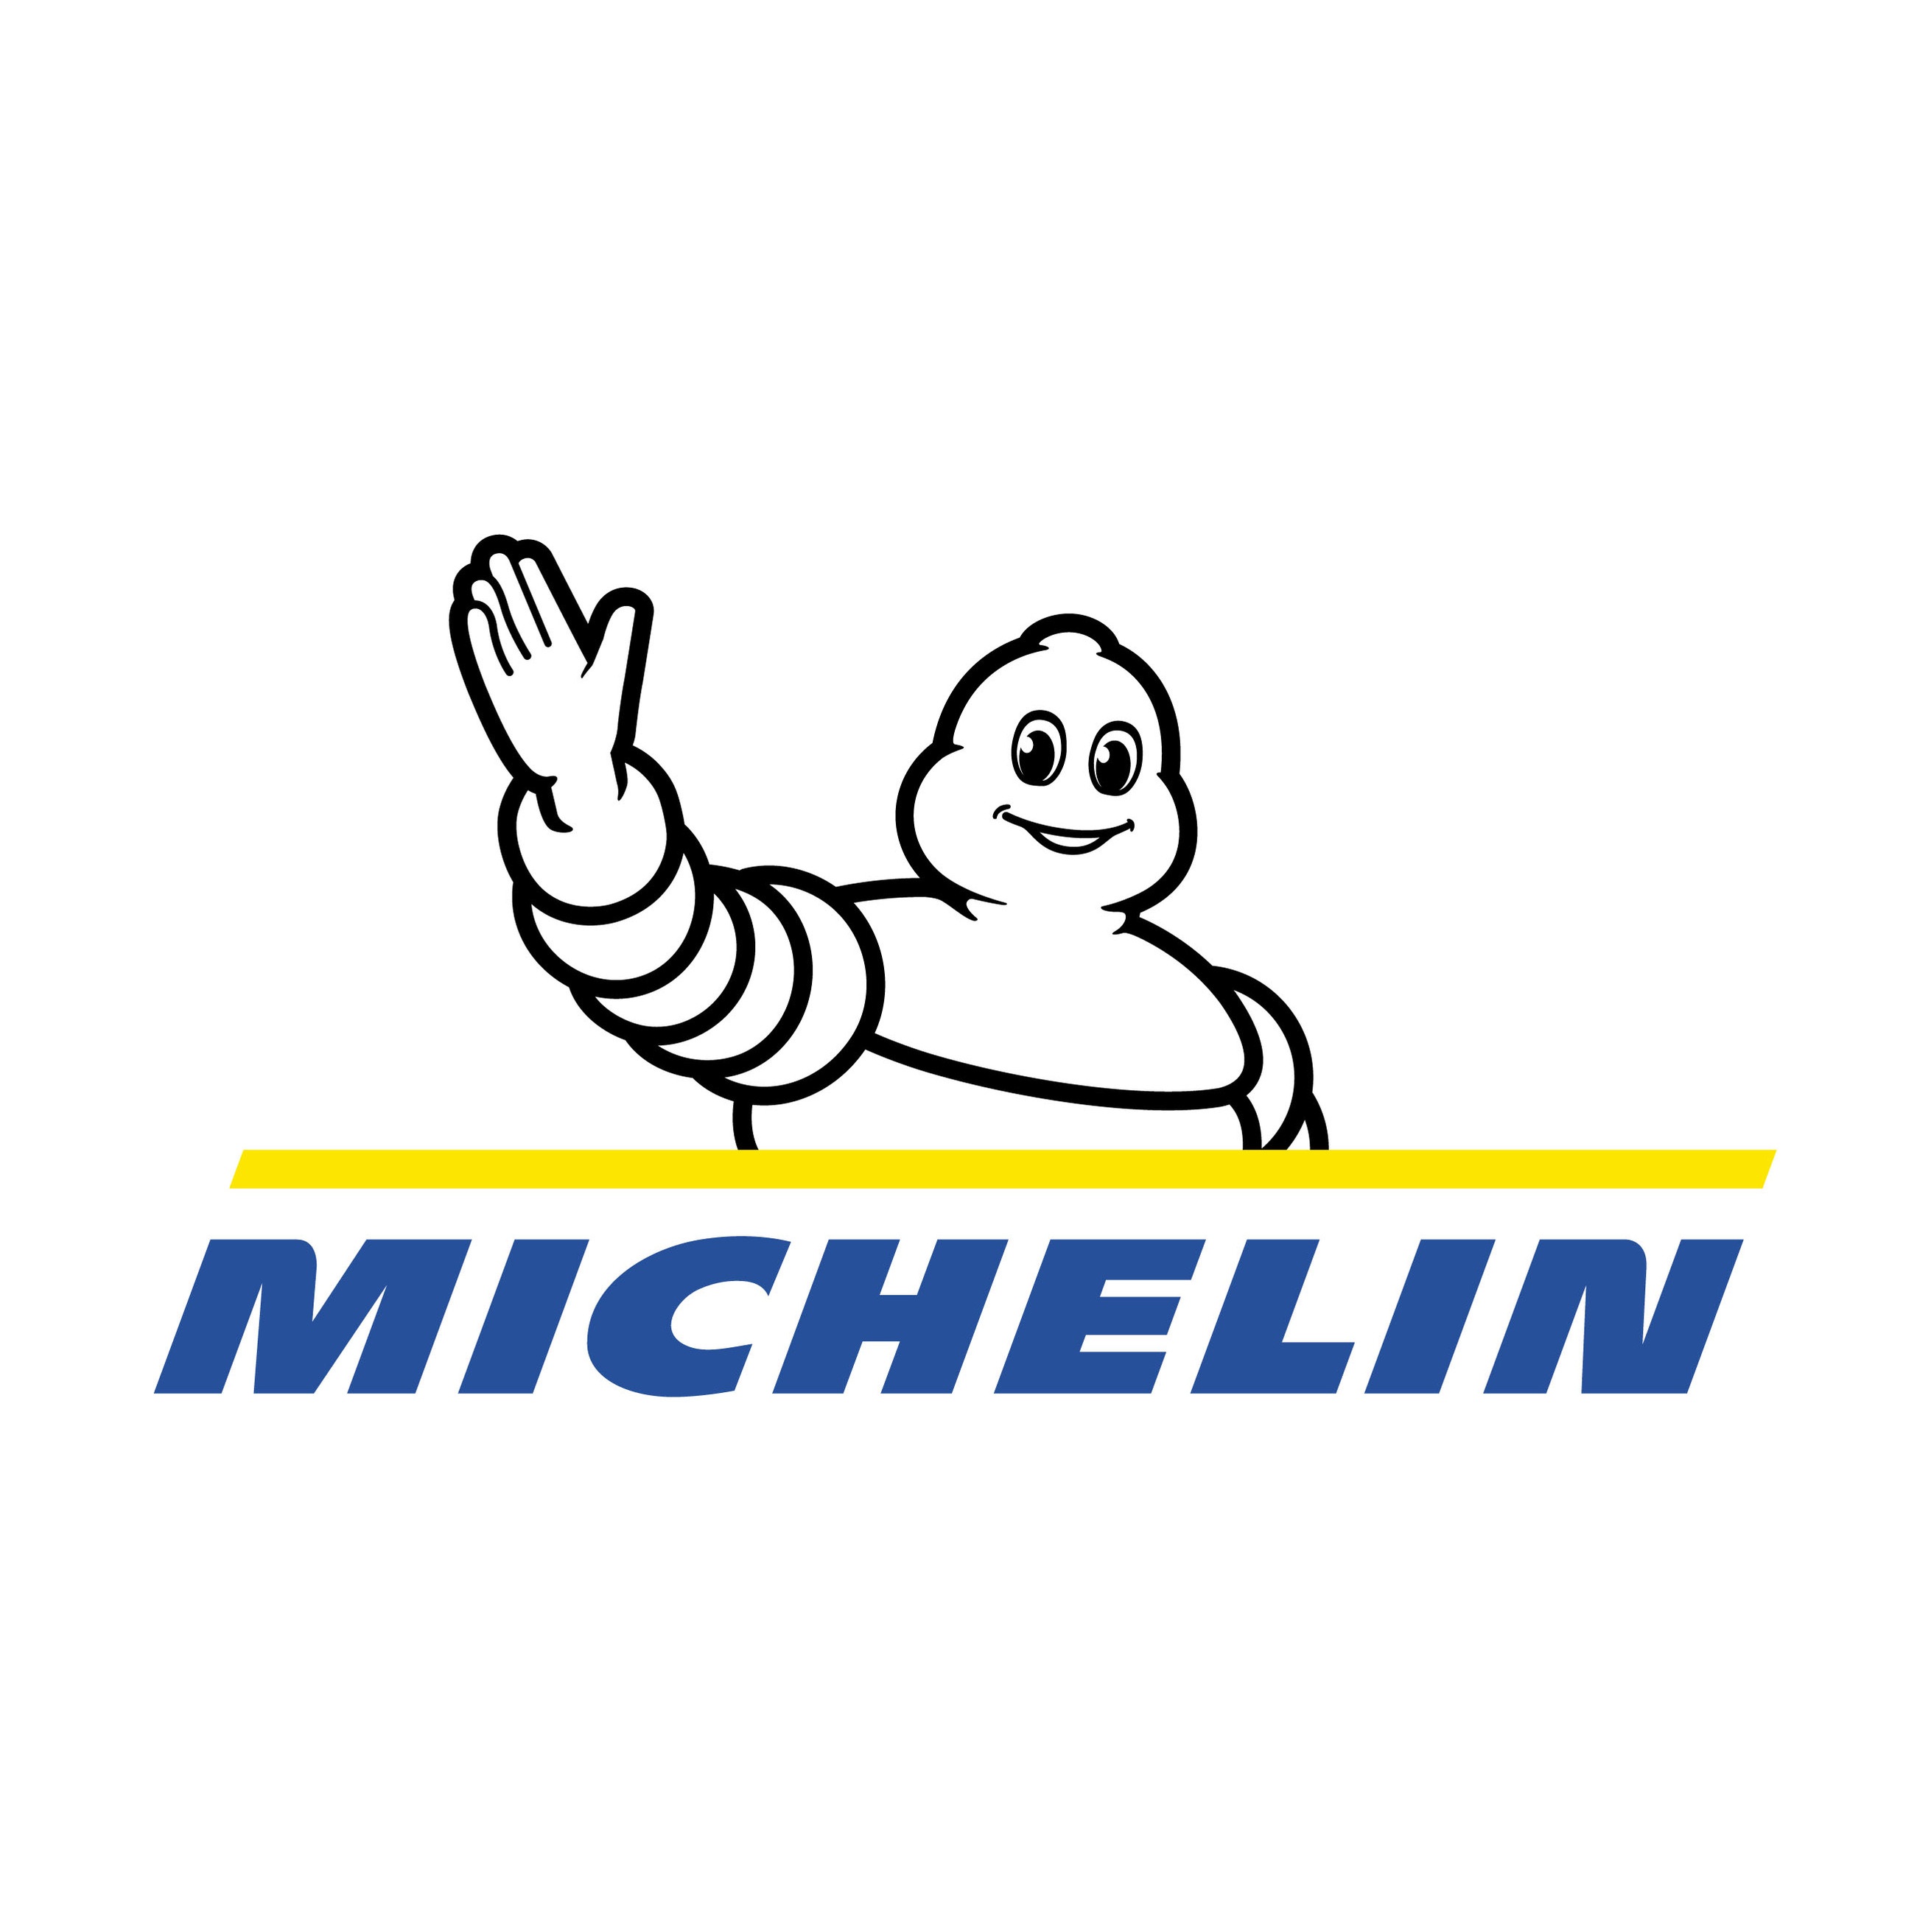 Michelin’s CO2 reduction targets approved by SBTi*